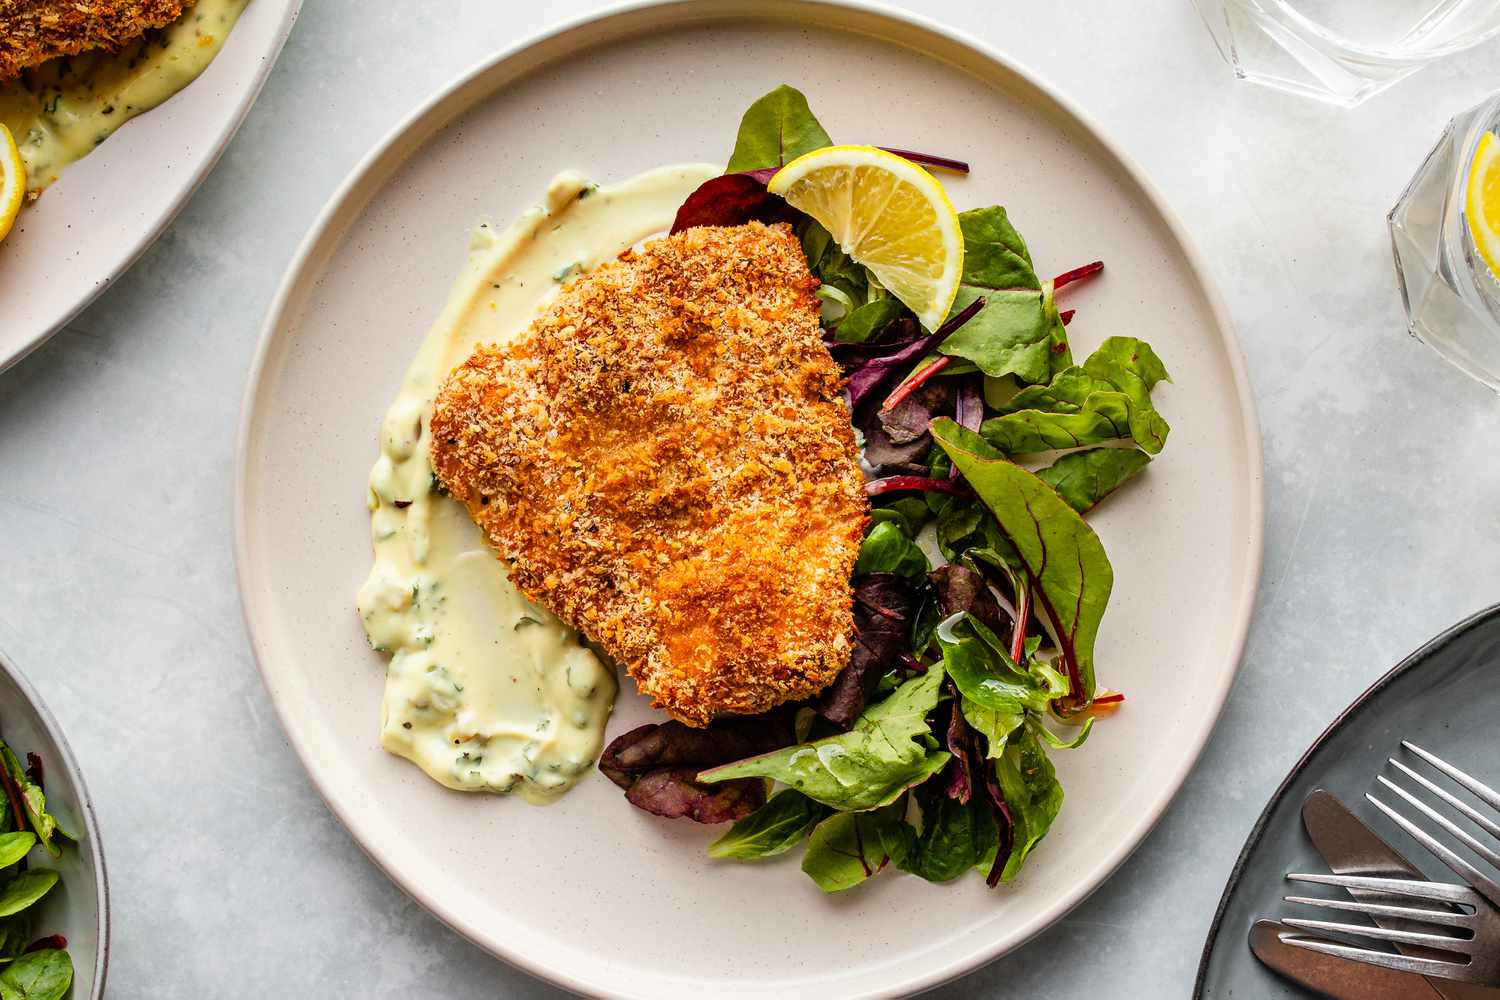 Panko-crusted oven-fried haddock on a plate with mixed greens, tartar sauce, and sliced orange